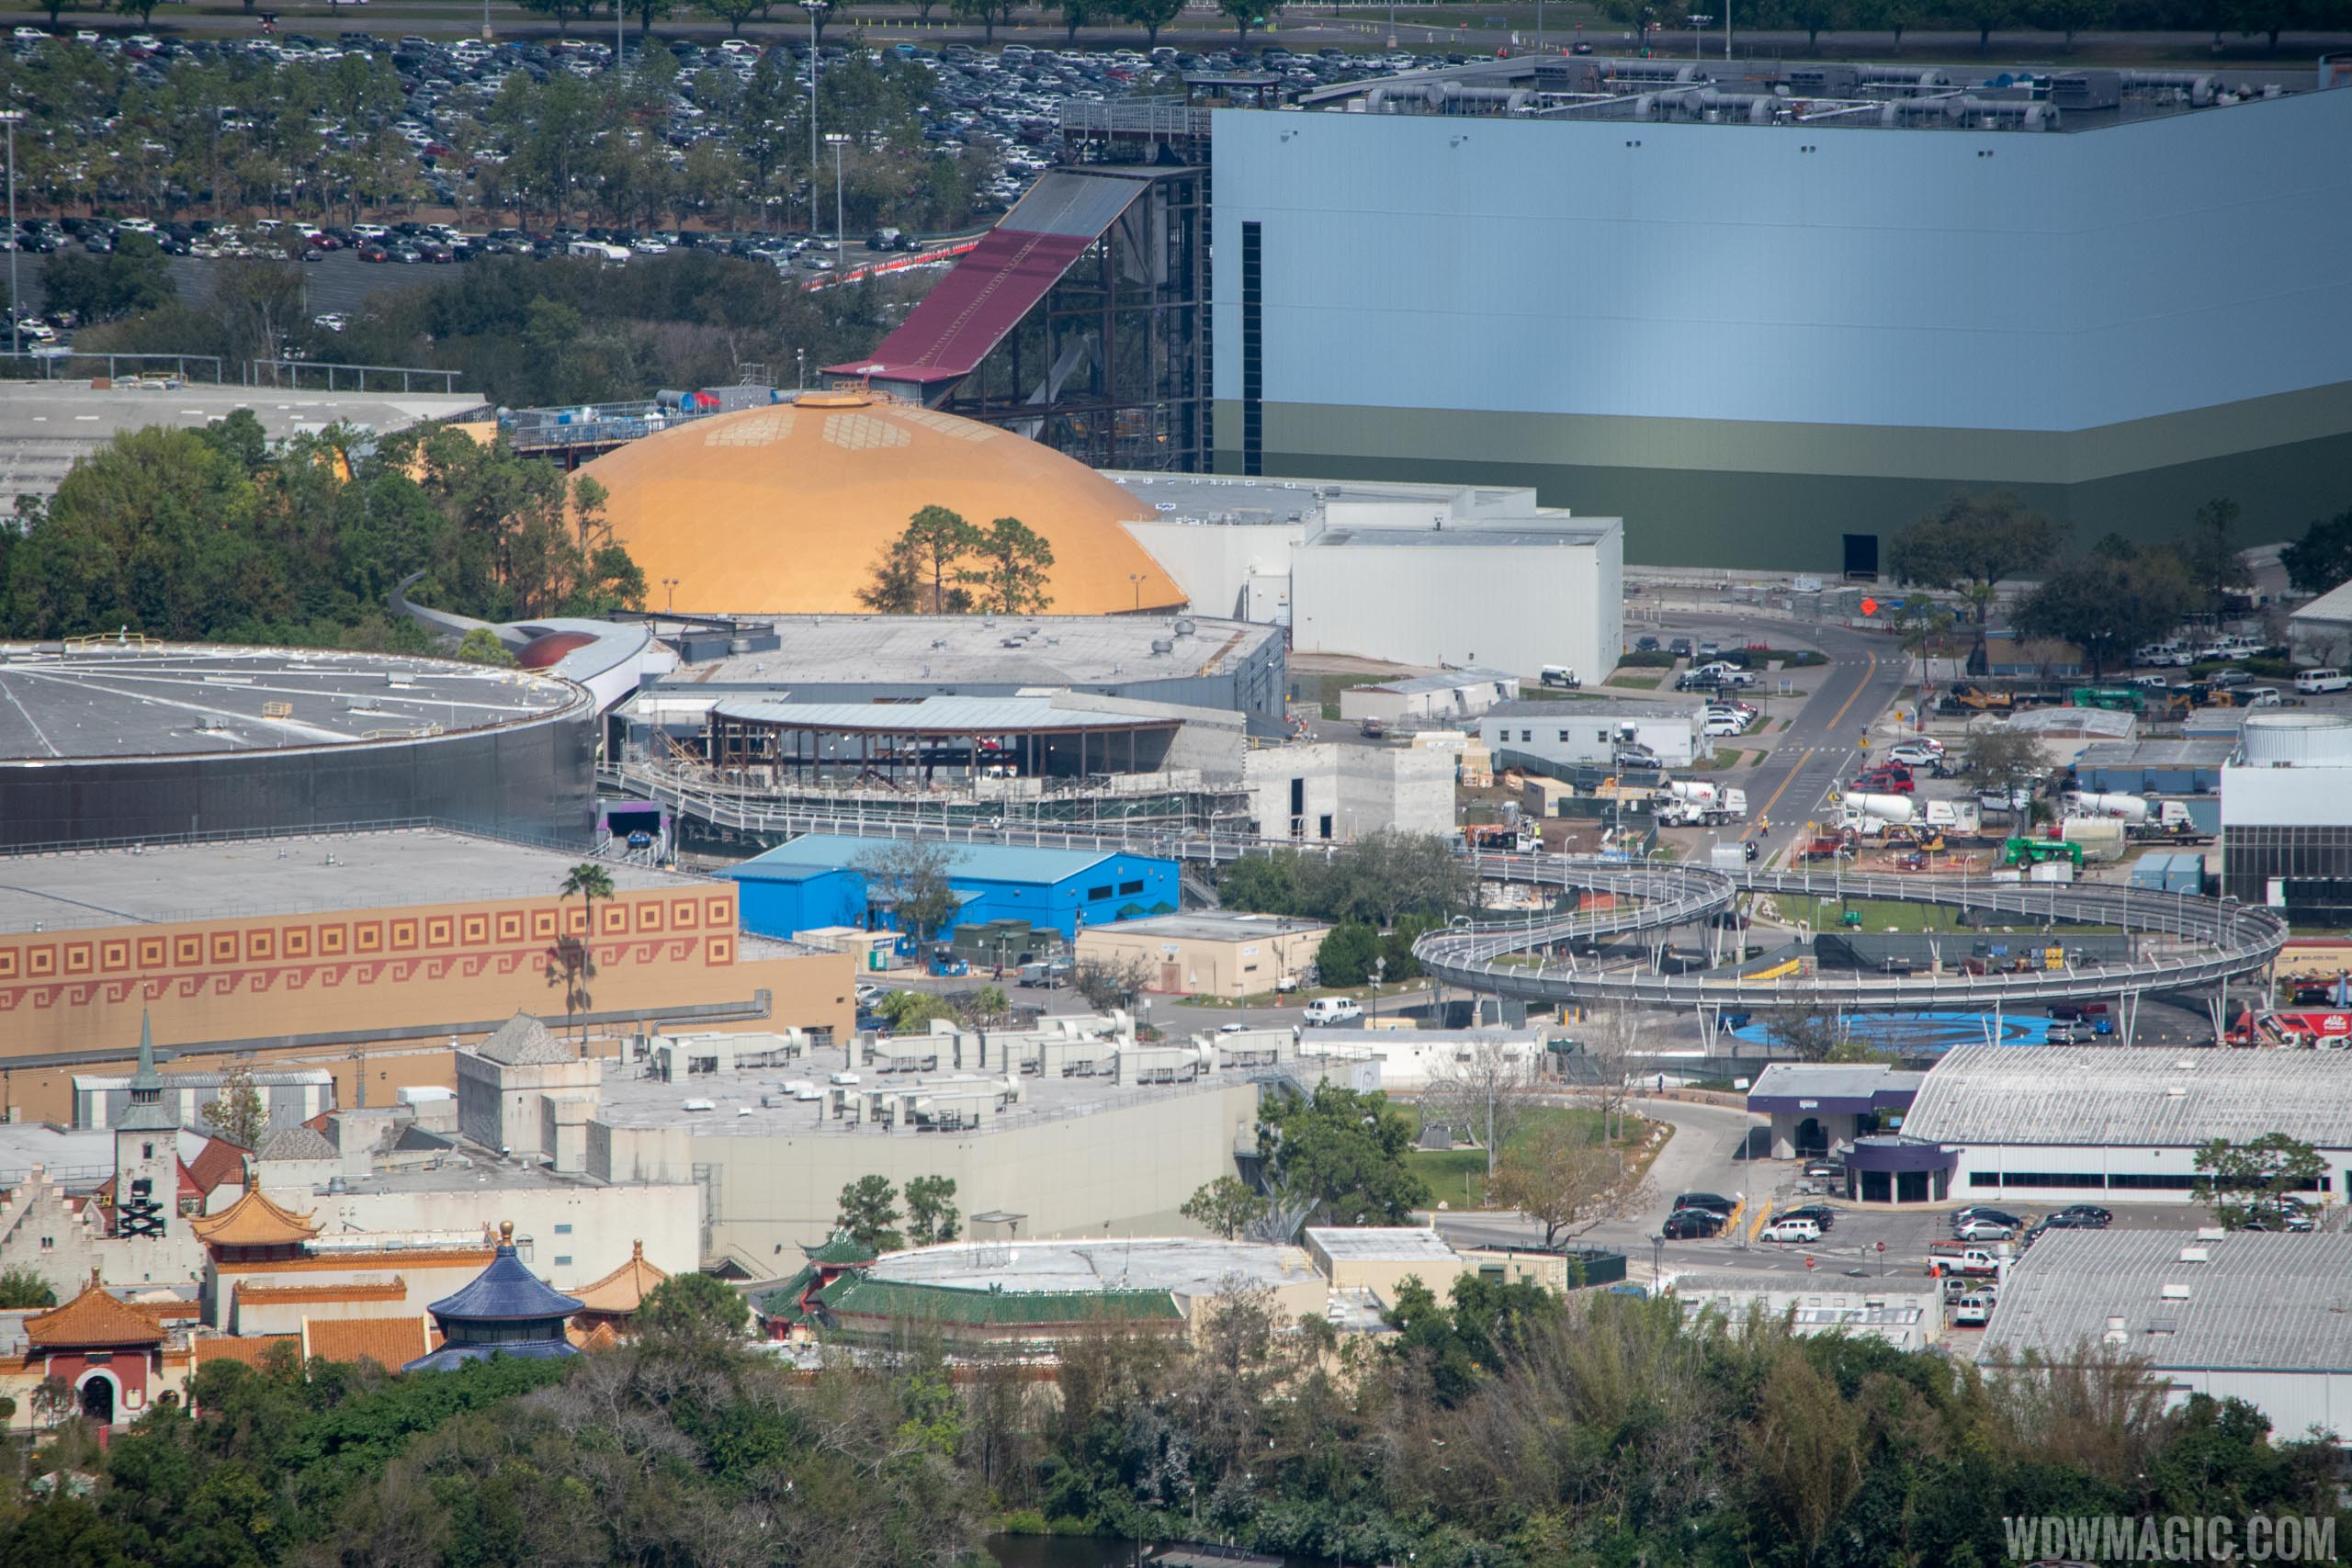 PHOTOS - Epcot's Space-themed restaurant takes shape